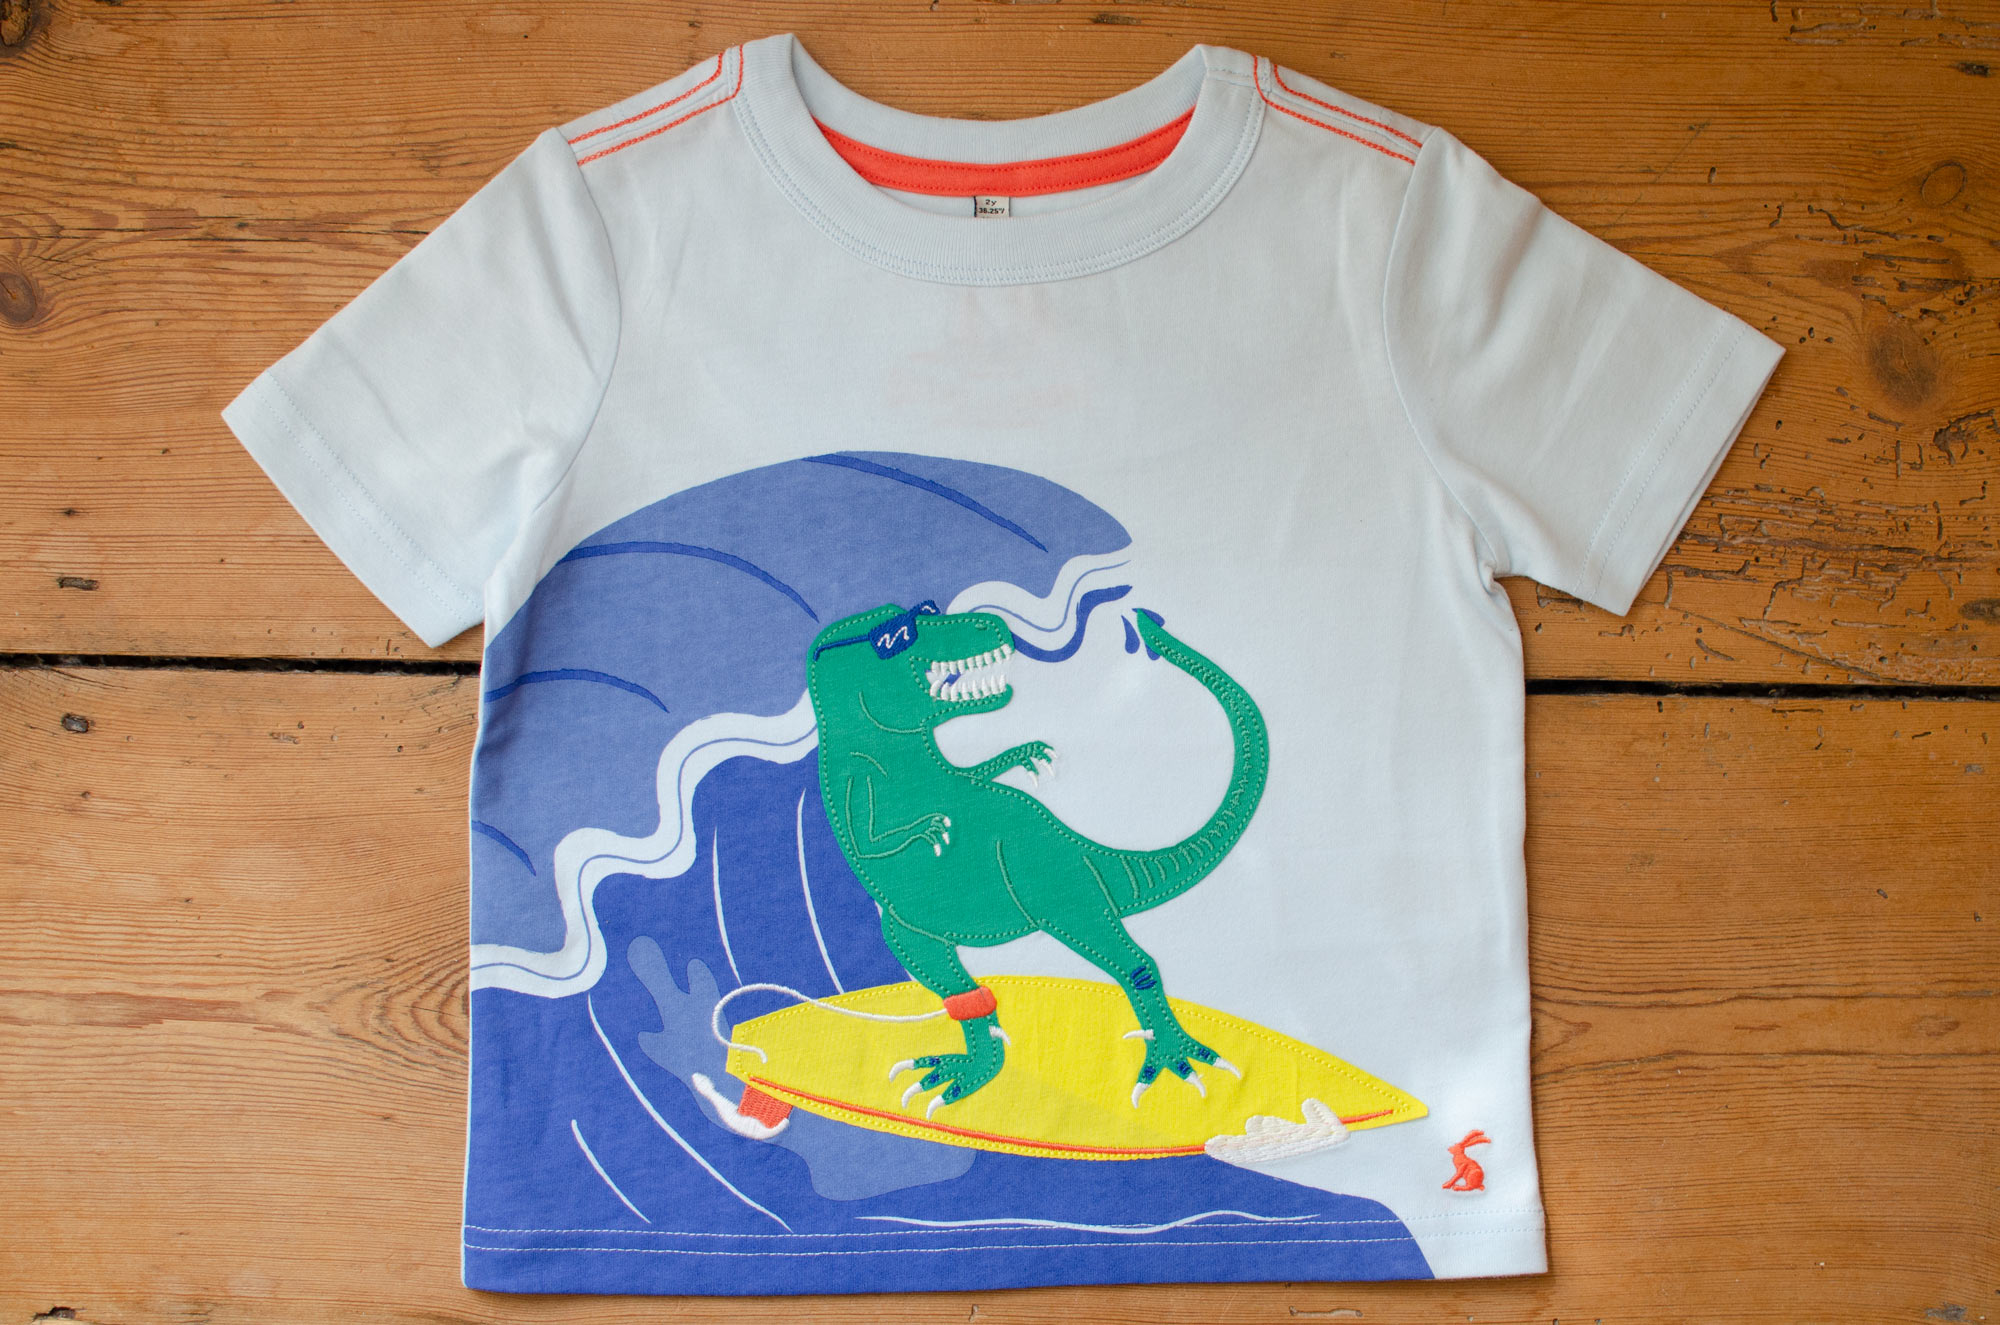 Surfing Dinosaur Illustration by Elly Jahnz for Joules